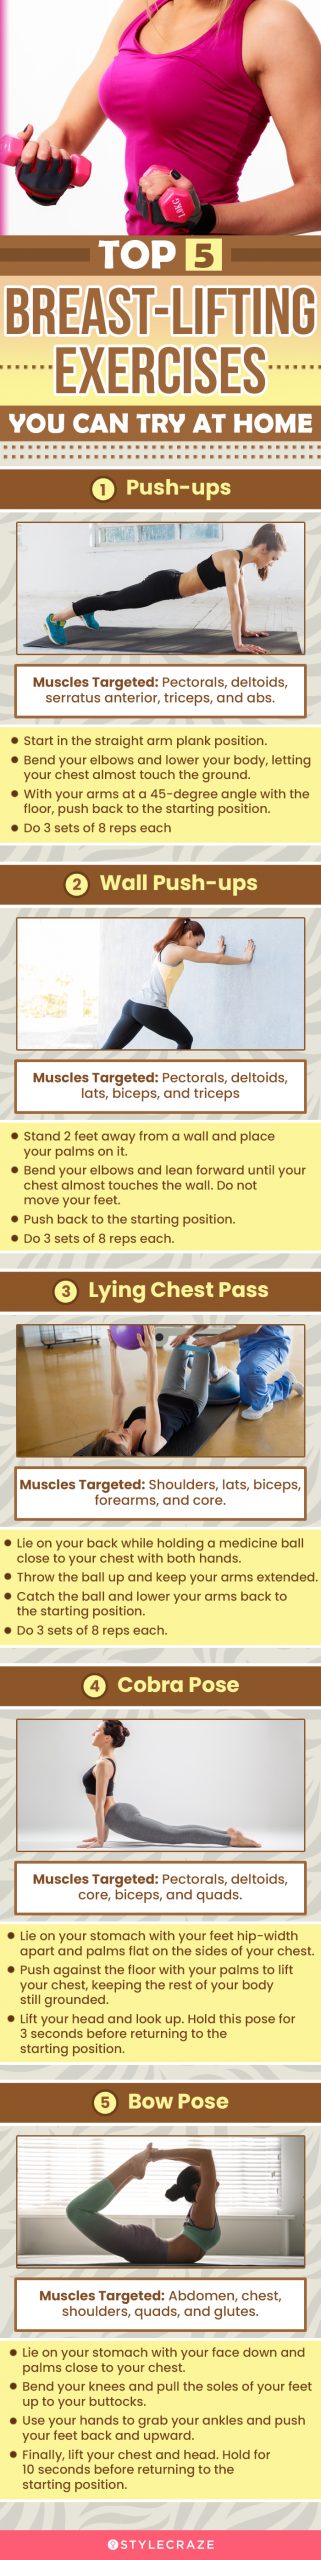 5 Super Simple Exercises for Lower Back Pain [Infographic]